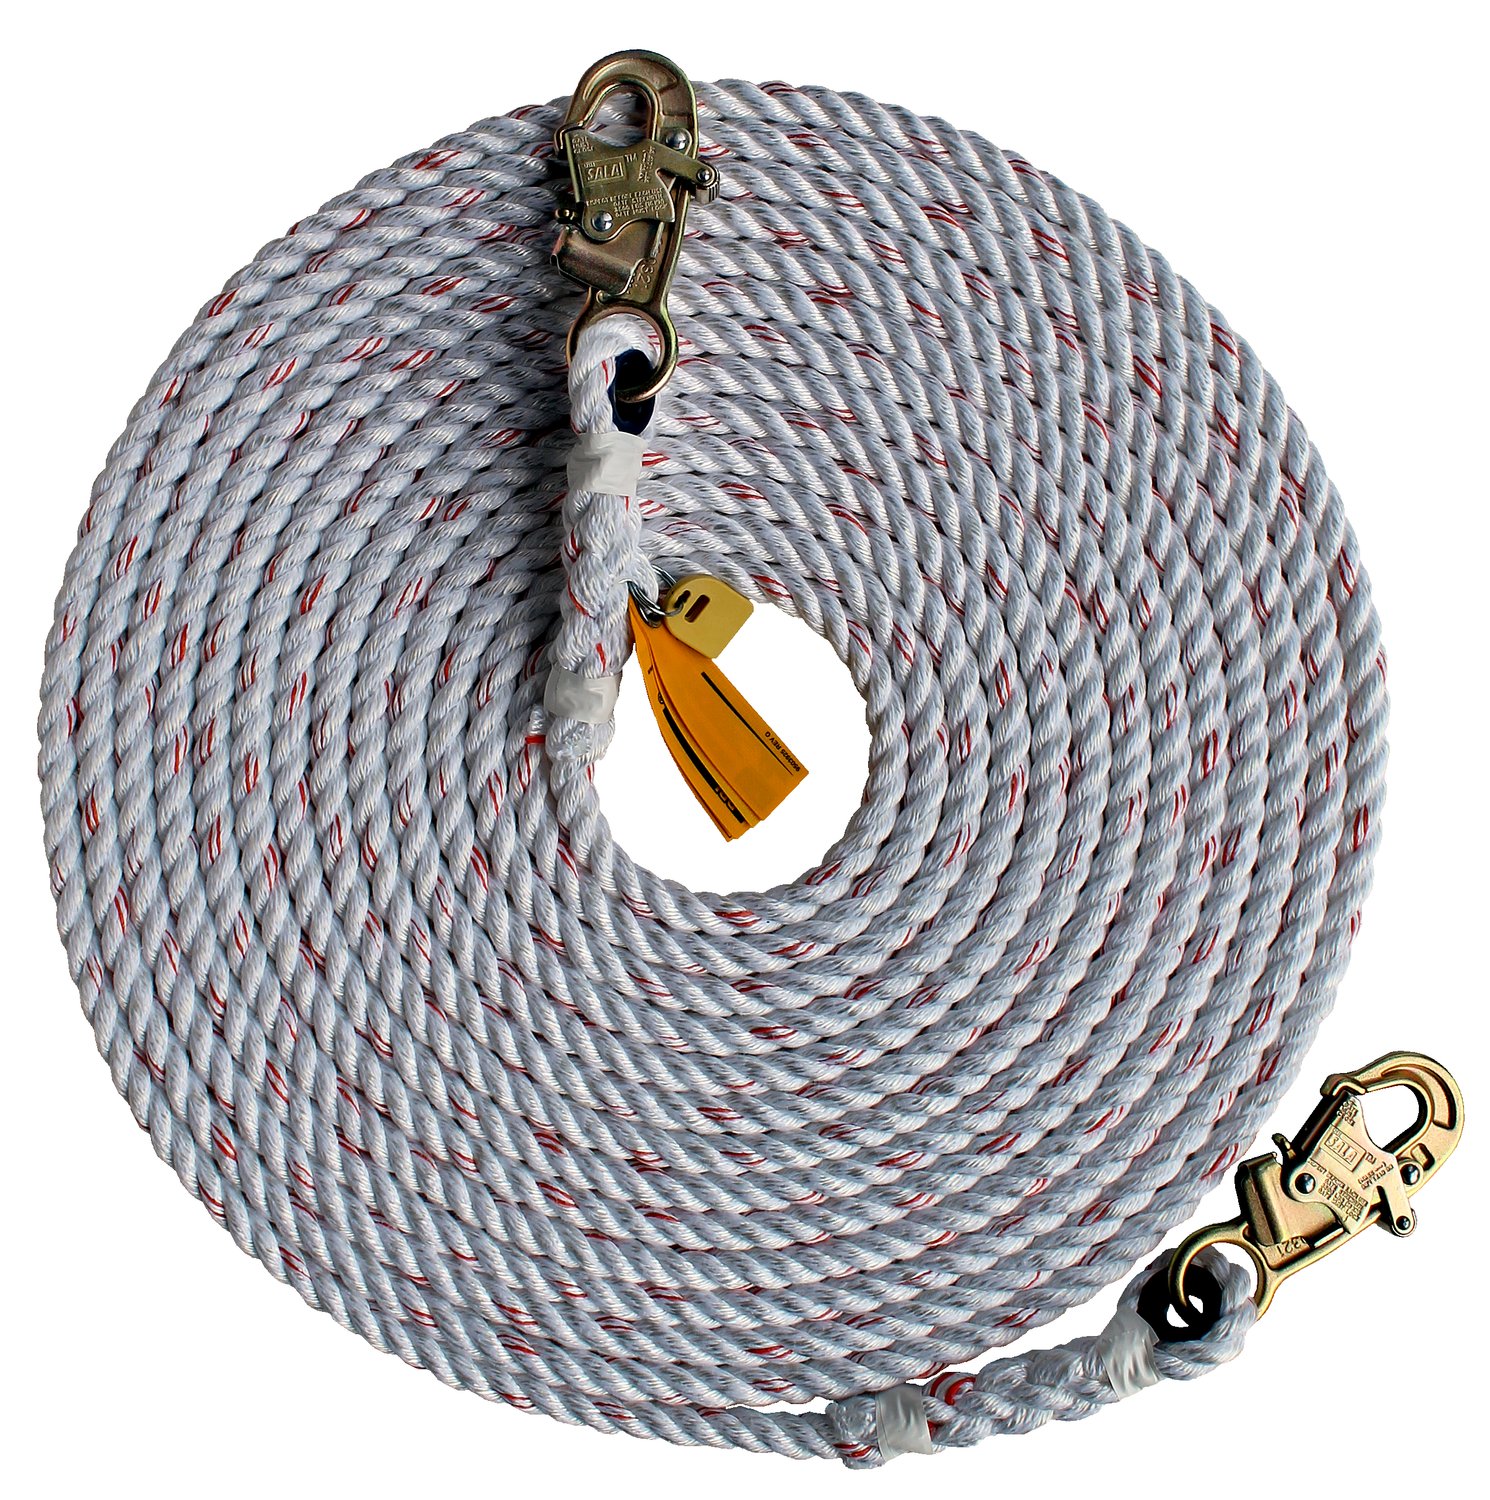 7100262940 - 3M DBI-SALA Rope Lifeline with Snap Hook Both Ends 1202878, 5/8 in Polyester and Polypropylene Blend, White, 150 ft